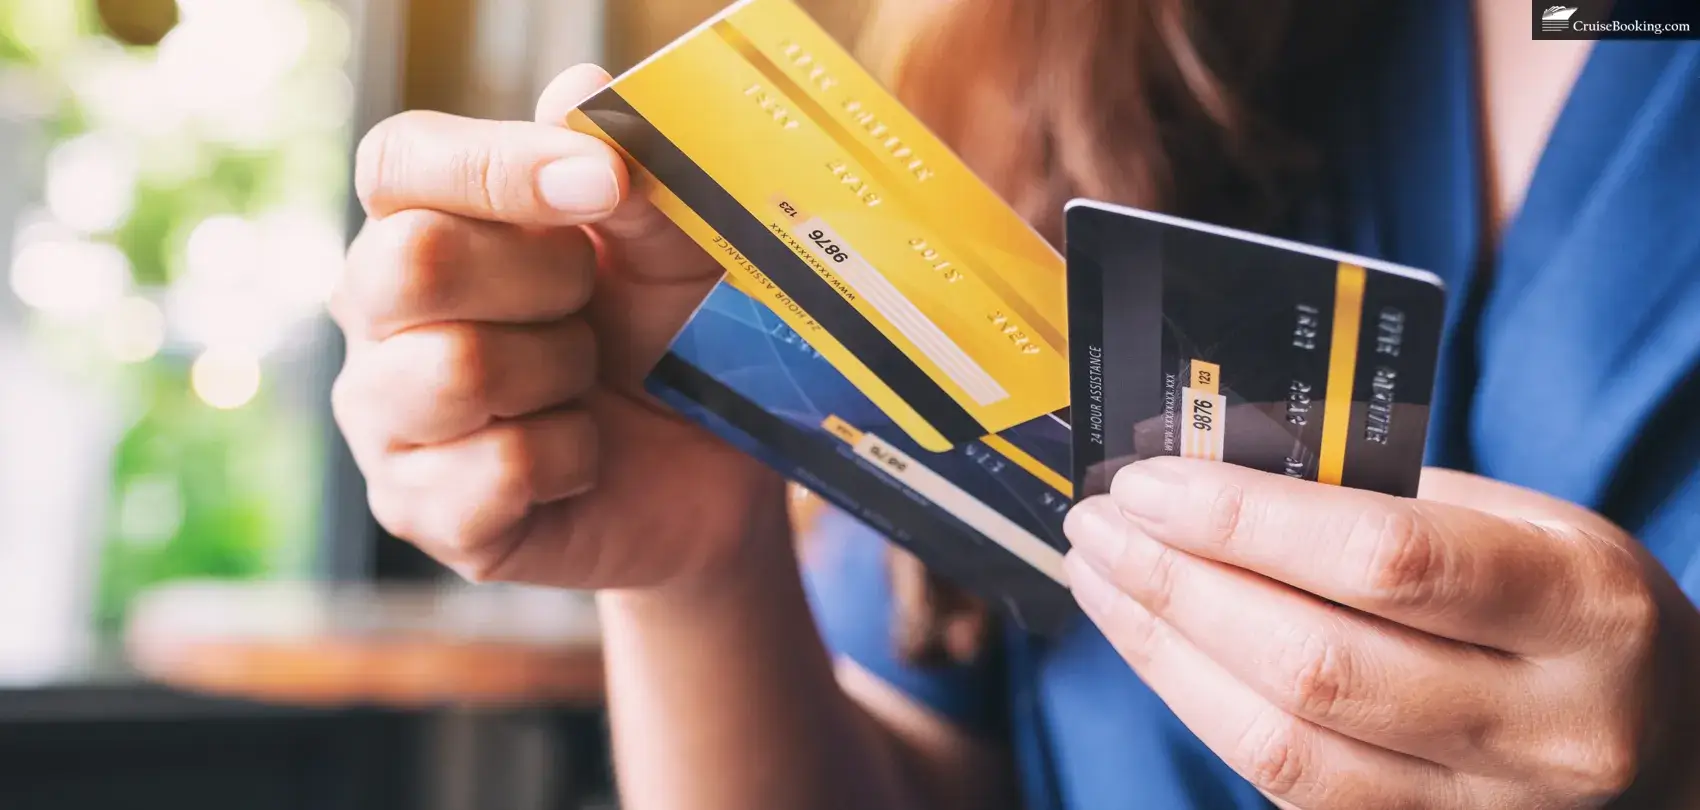 An image of a woman choosing a credit card